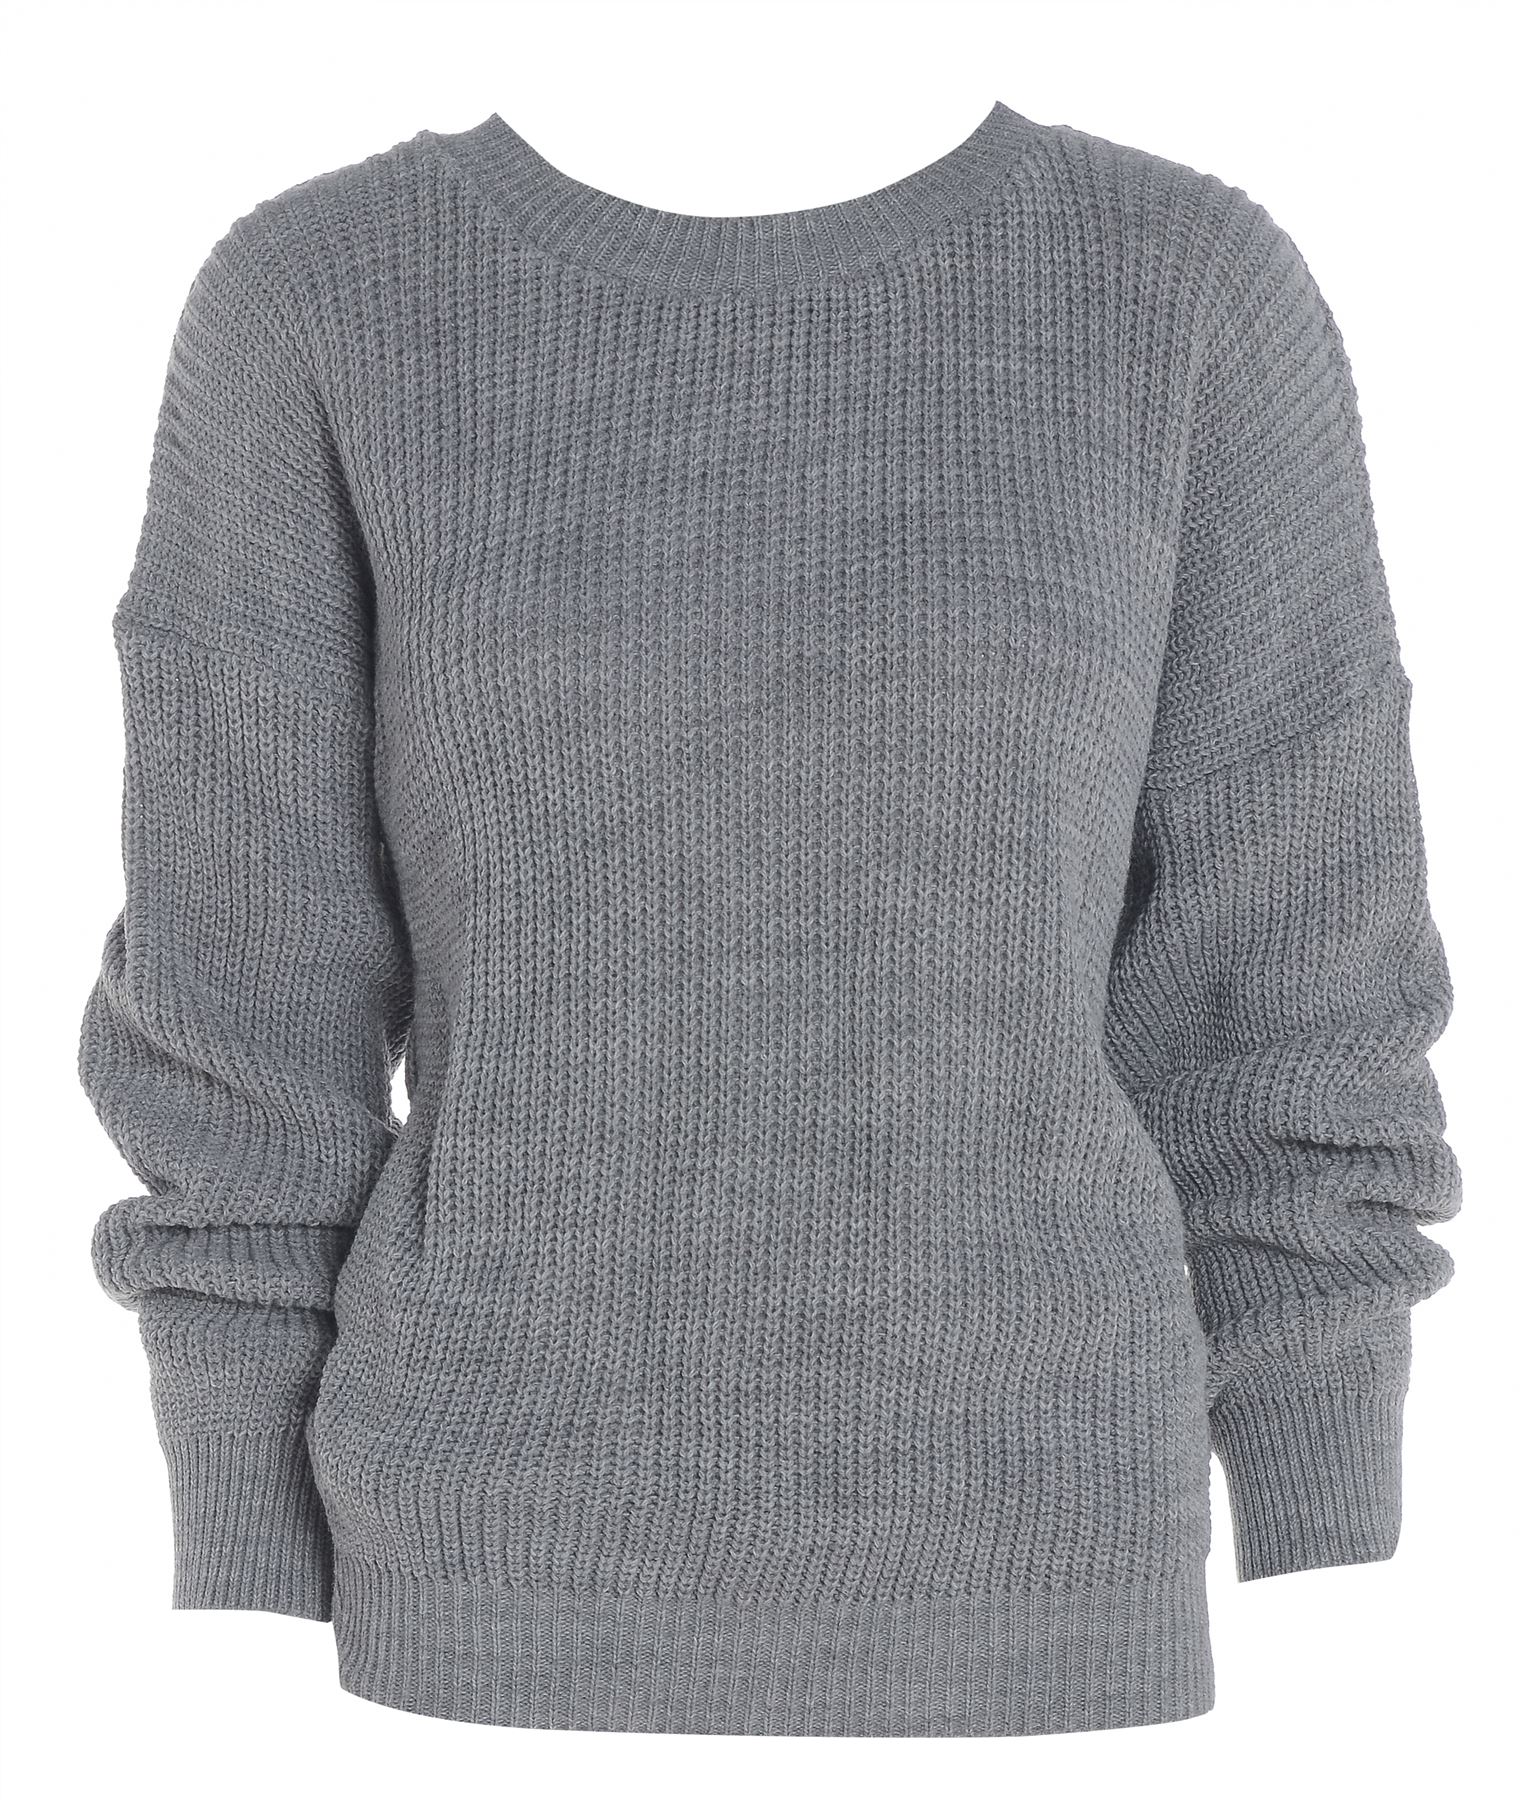 knitted jumpers ladies-womens-plain-colour-chunky-knitted-baggy-jumper- eowamxm